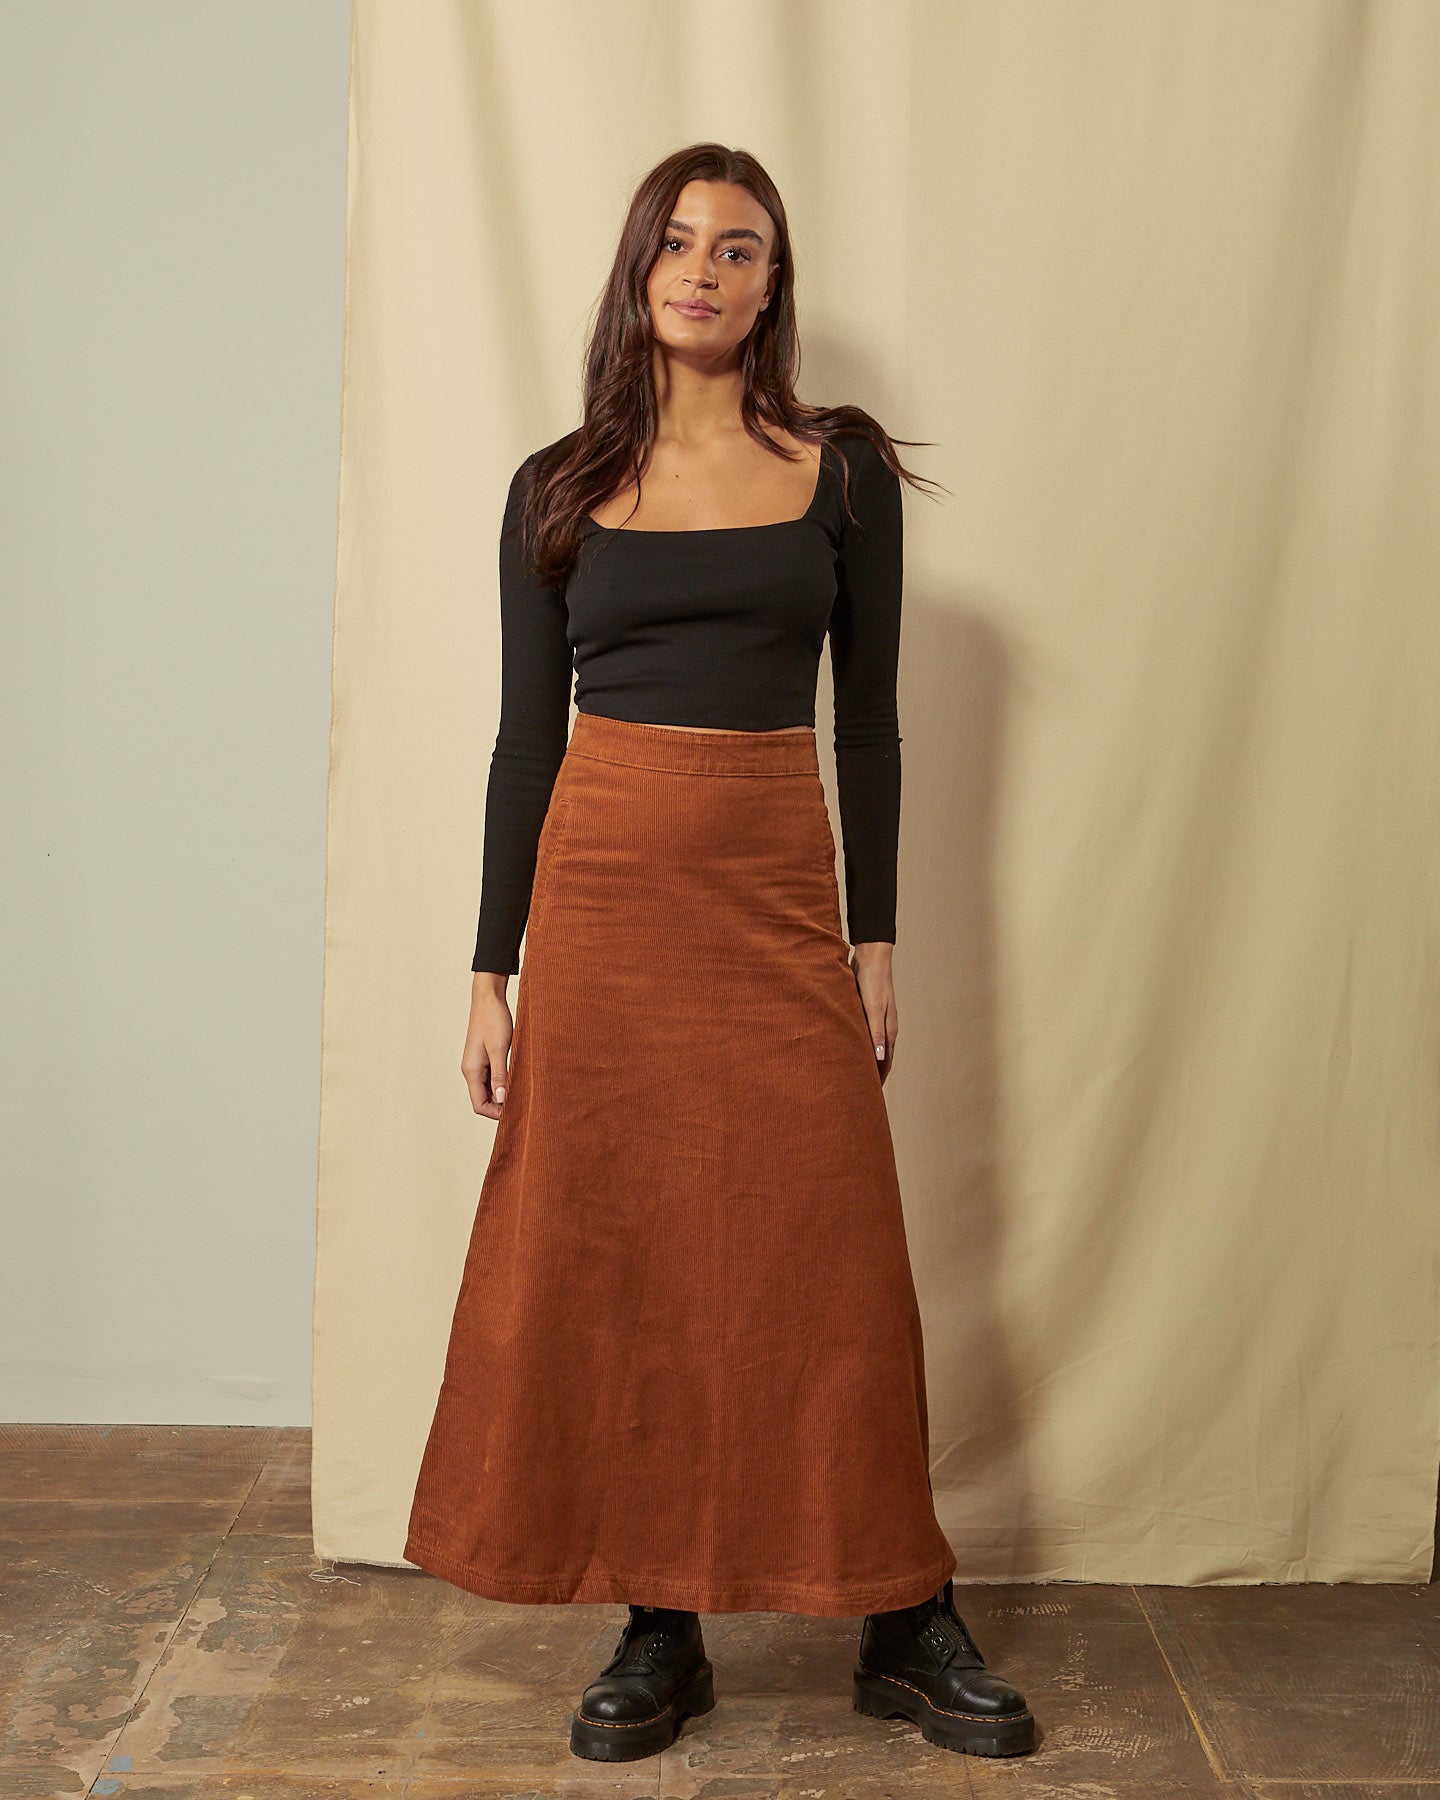 Full-length front view of model wearing Lottie brown corduroy maxi-skirt demonstrating A-line silhouette.